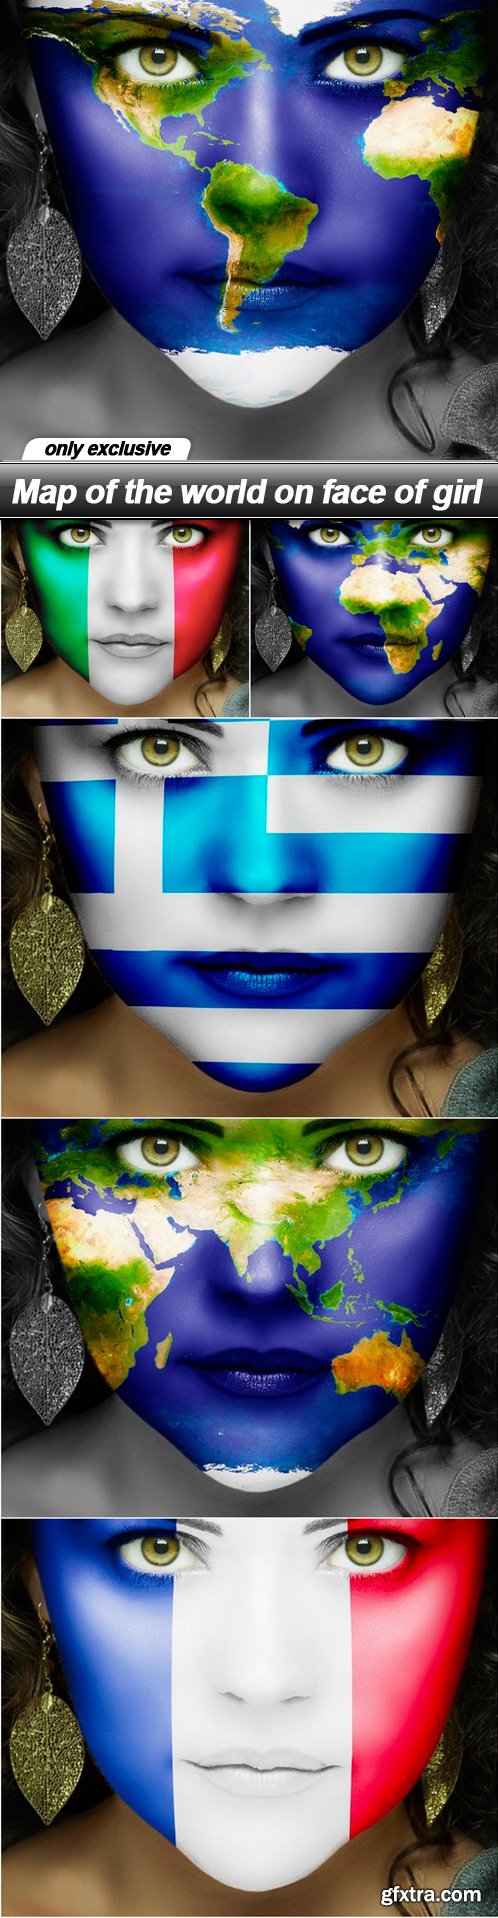 Map of the world on face of girl - 6 UHQ JPEG